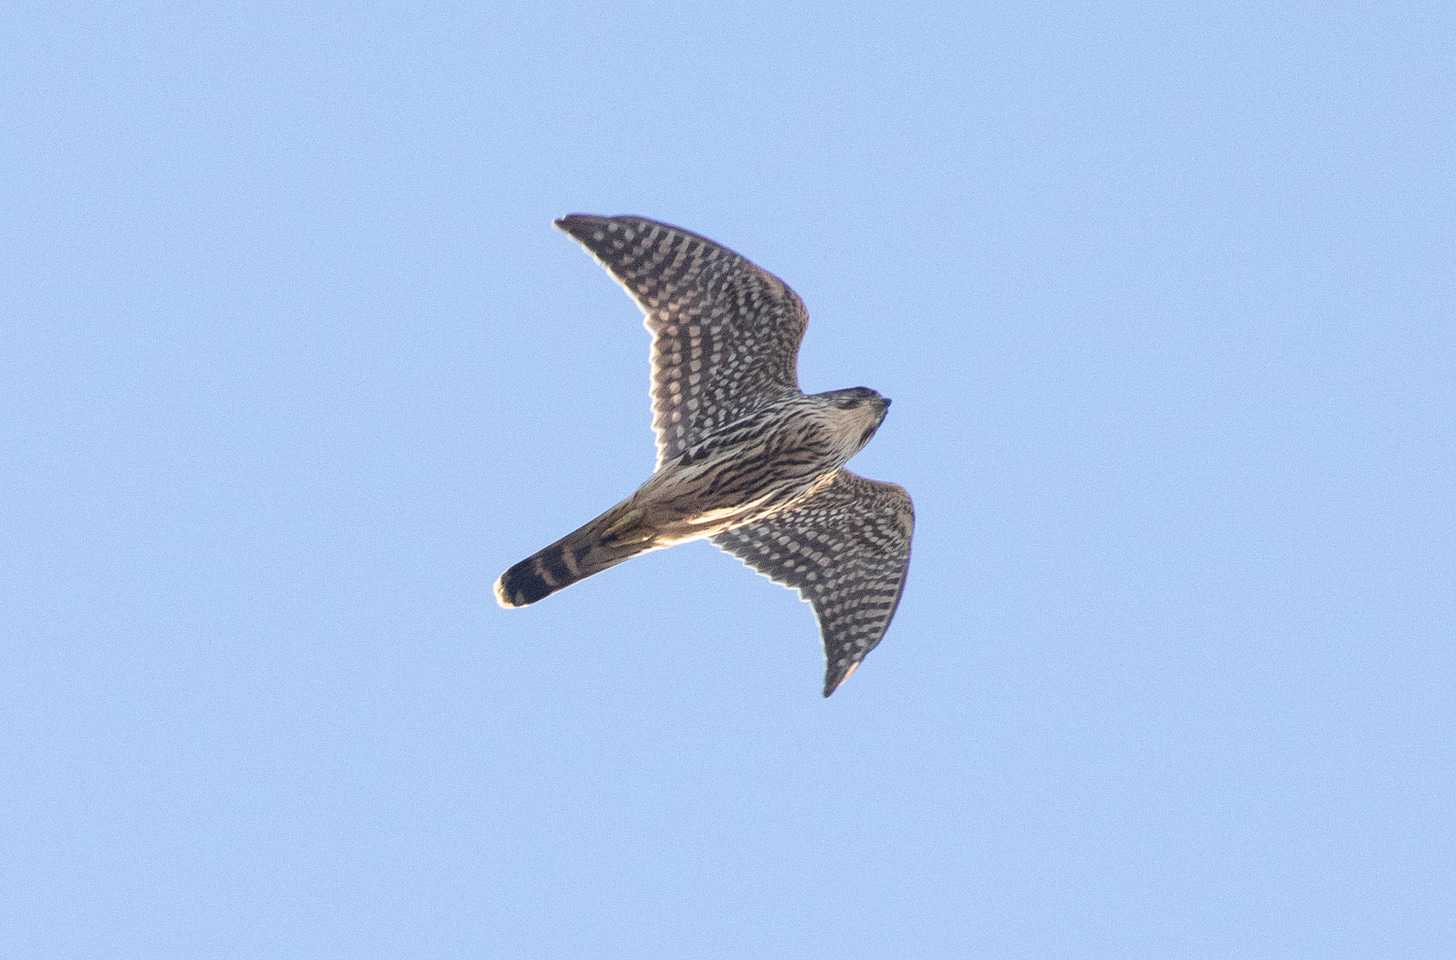 a small falcon with a streaked belly, checkered underwings, and striped tail, viewed from below against a blue sky as it flies directly overhead